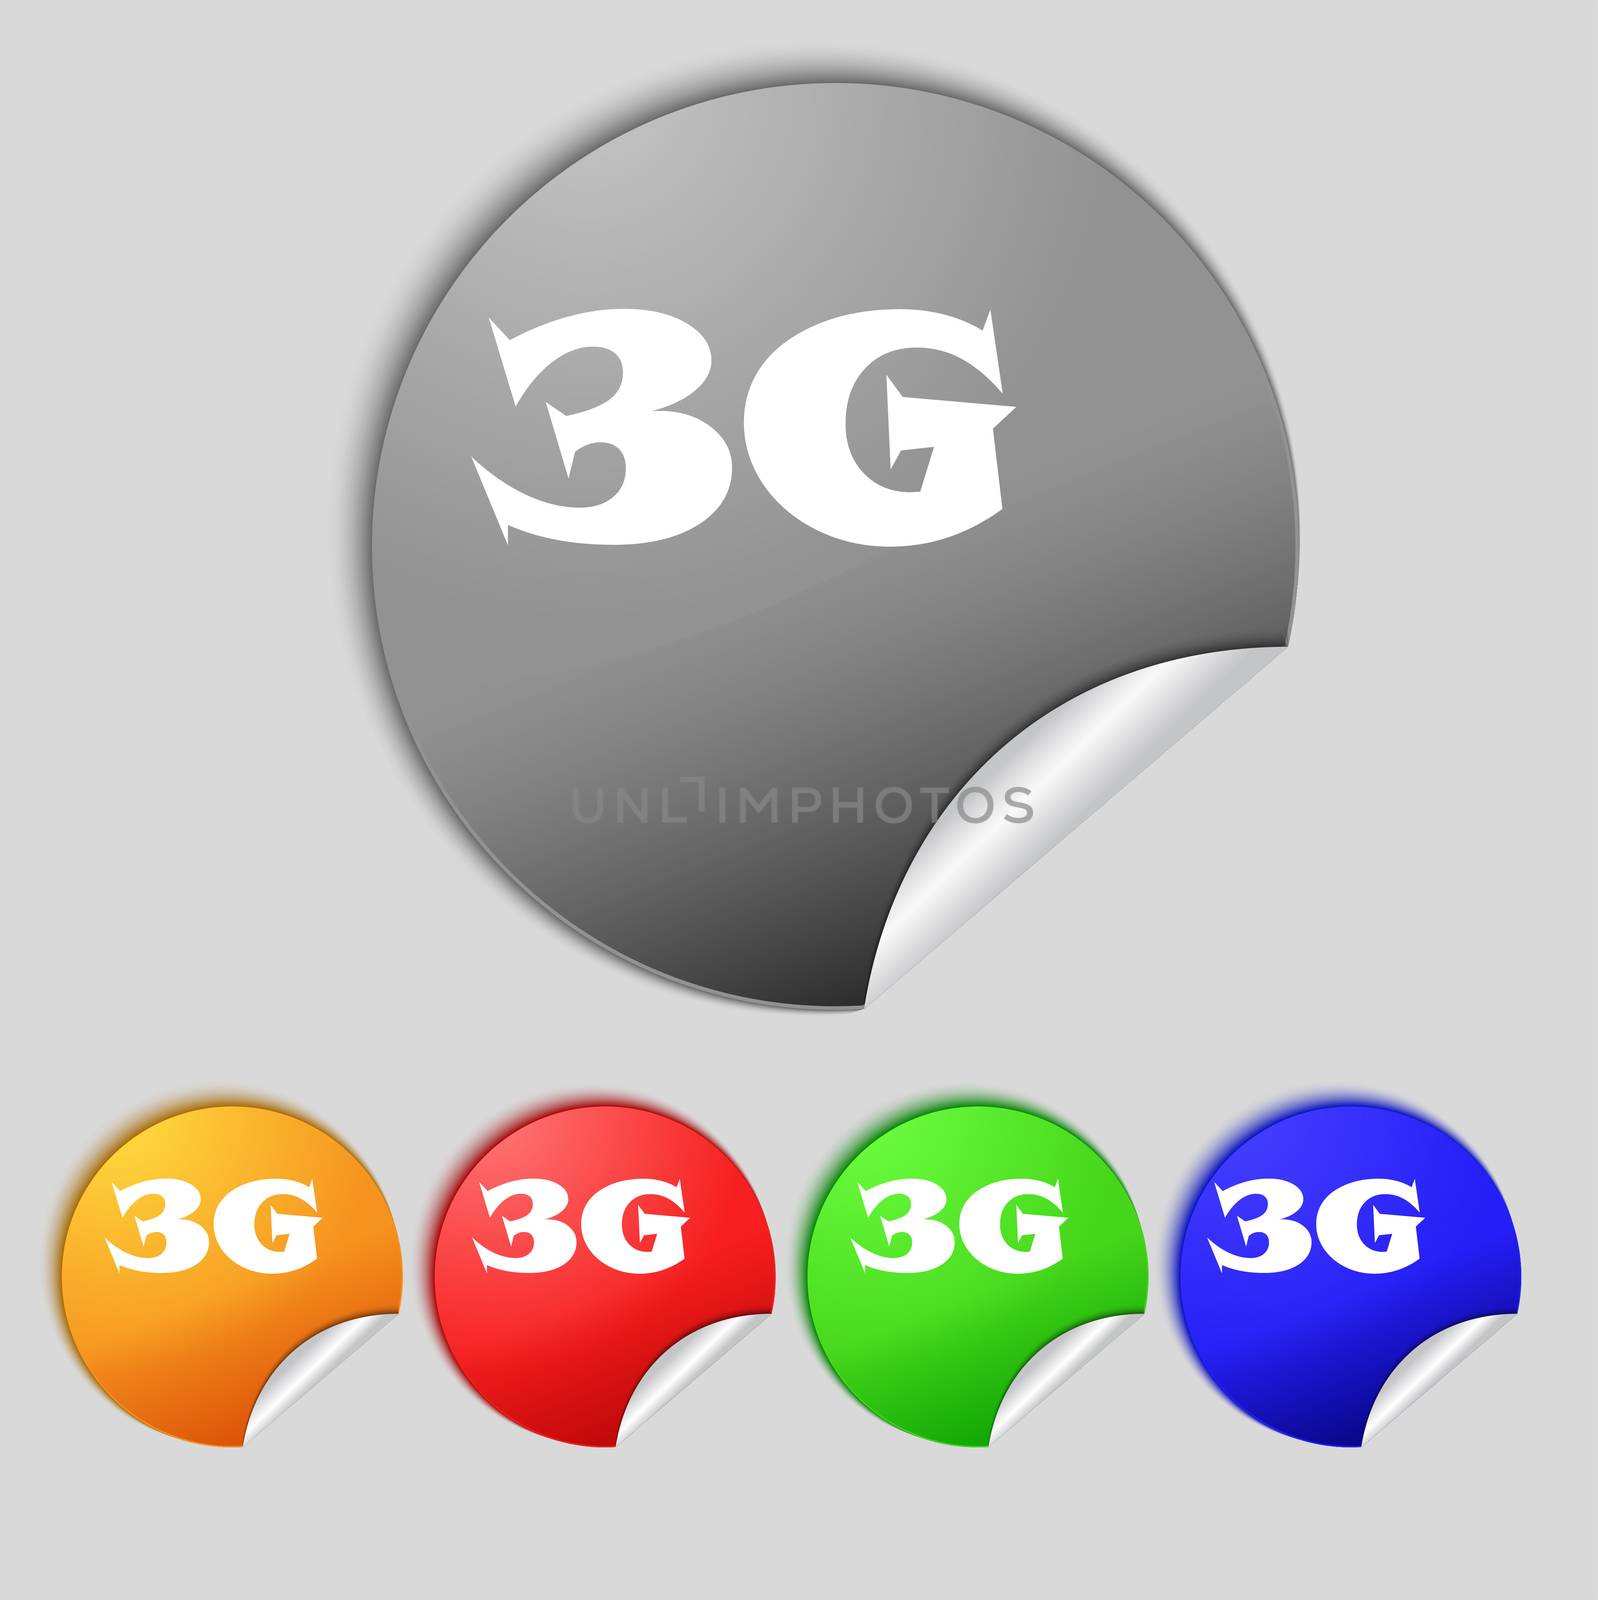 3G sign icon. Mobile telecommunications technology symbol. Set of colour buttons. illustration